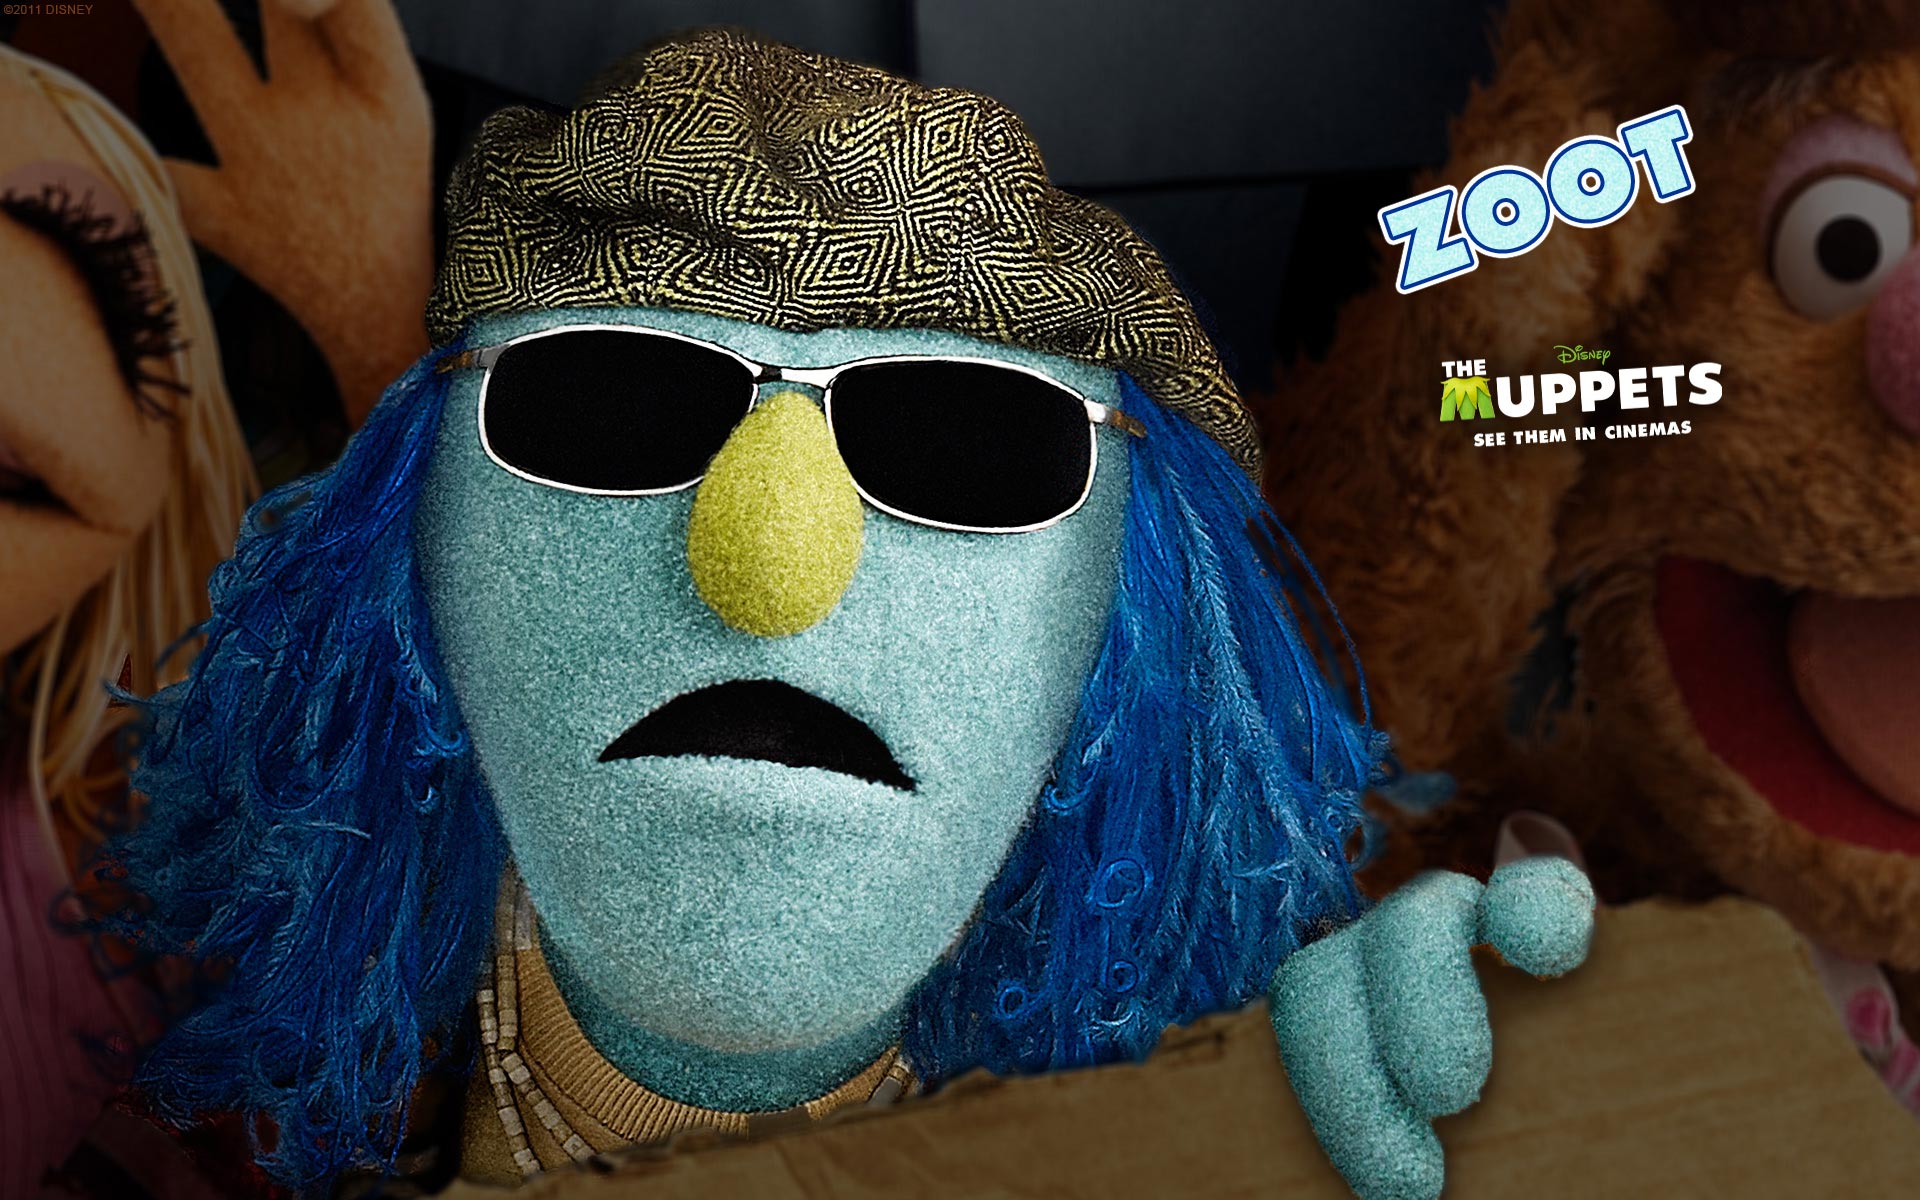 Zoot, The Muppets Wallpaper 1920x1200